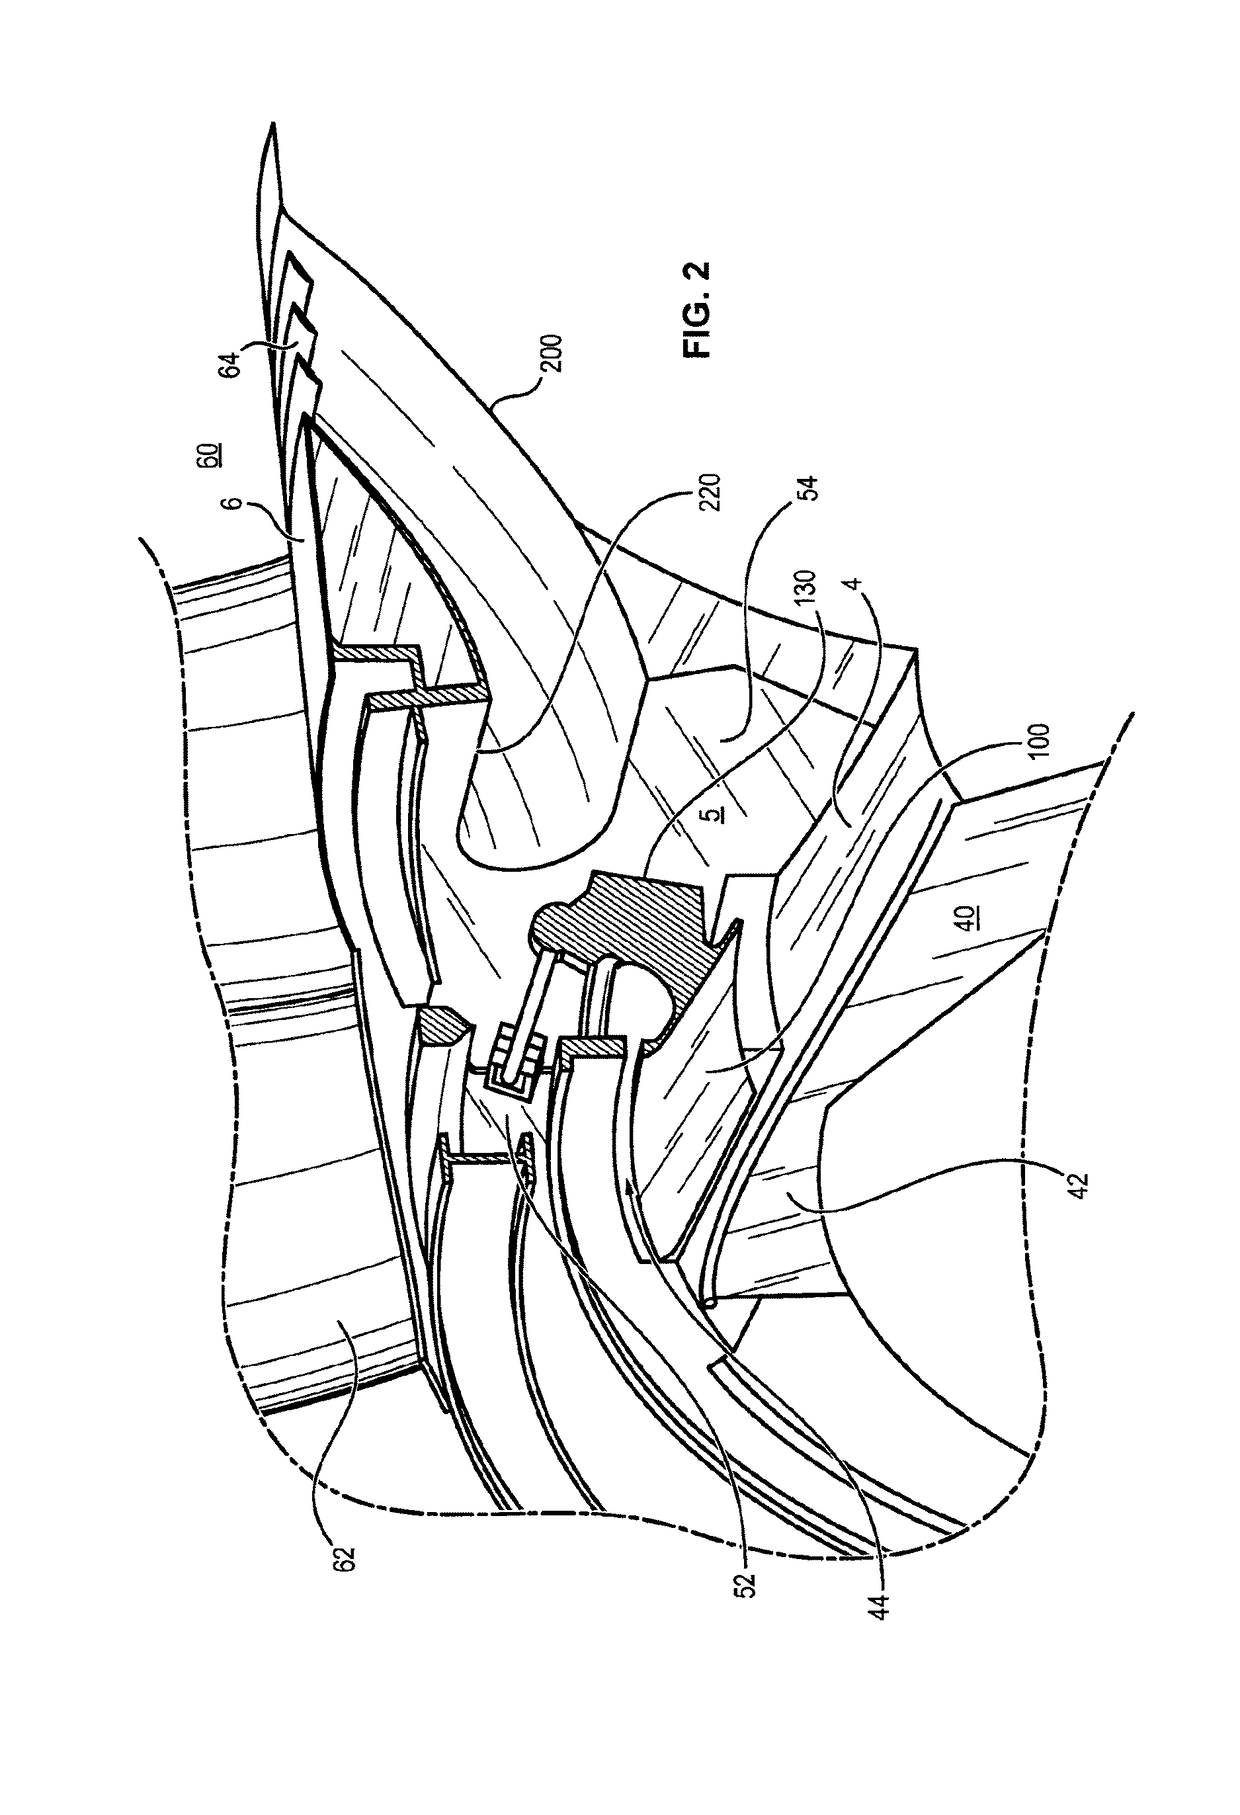 Hub of an intermediate casing for an aircraft turbojet engine comprising doors with contoured geometry